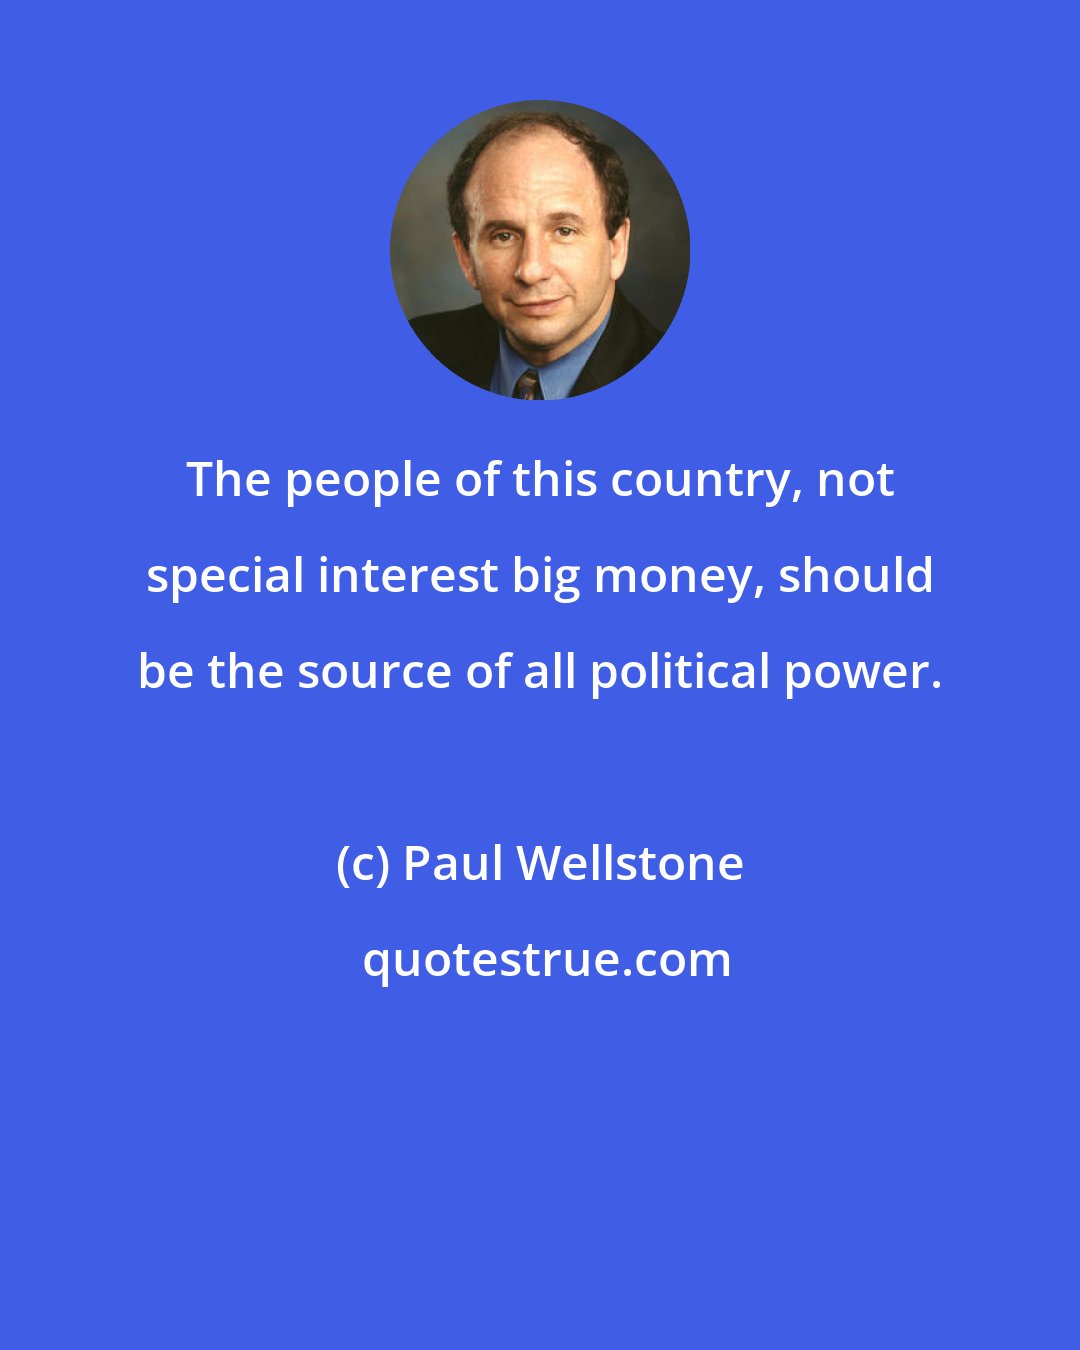 Paul Wellstone: The people of this country, not special interest big money, should be the source of all political power.